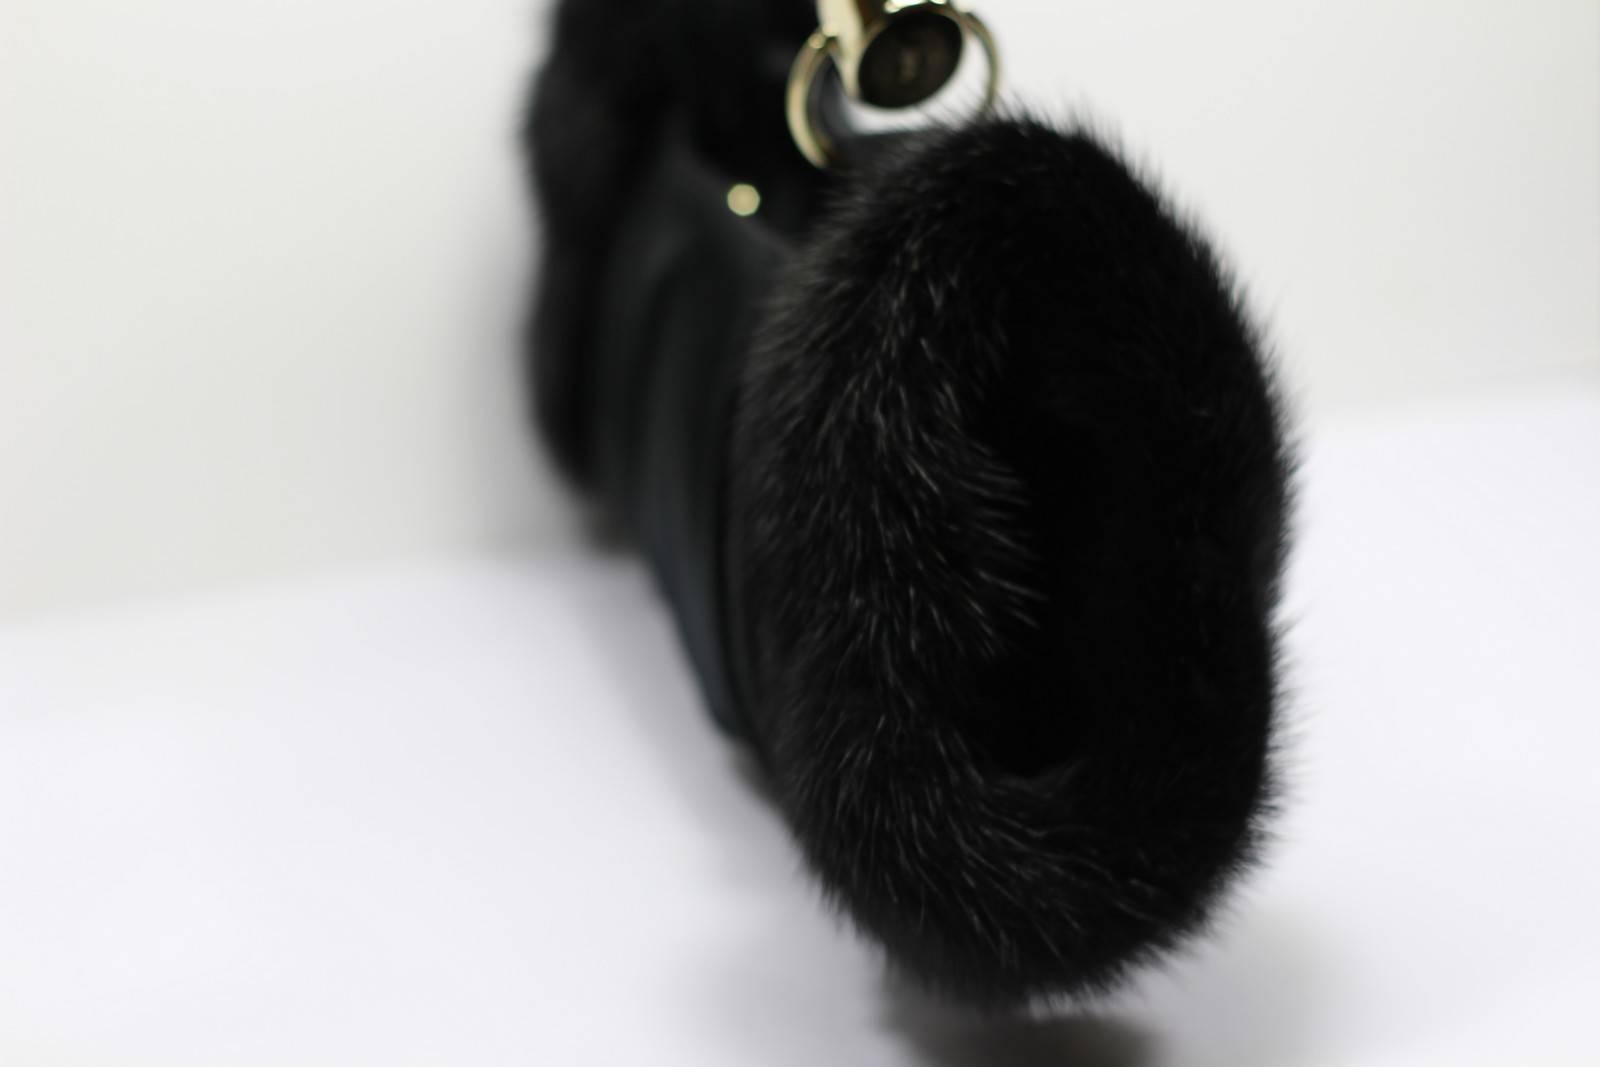 Women's Collectible Limited Edition Mombasa Handbag & Glove Satin Mink Tom ford for YSL